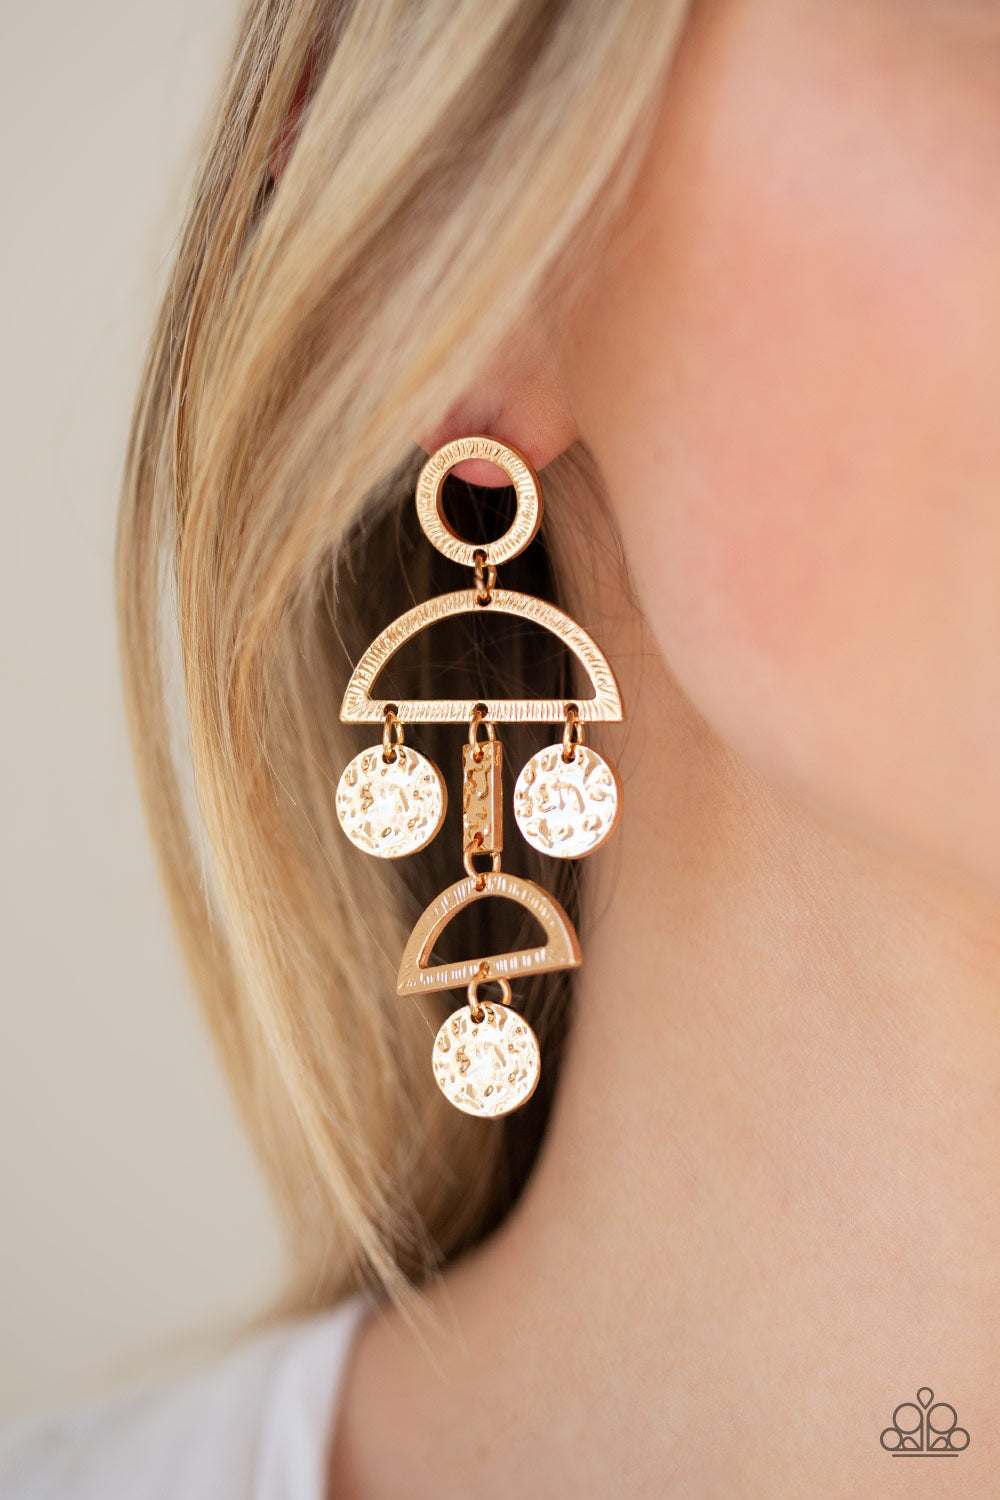 Incan Eclipse - Gold Fashion Earrings - Paparazzi Accessories - Delicately hammered and etched in shimmery textures, a collection of gold discs and gold frames connect into a tribal inspired lure. Earring attaches to a standard post earring. 